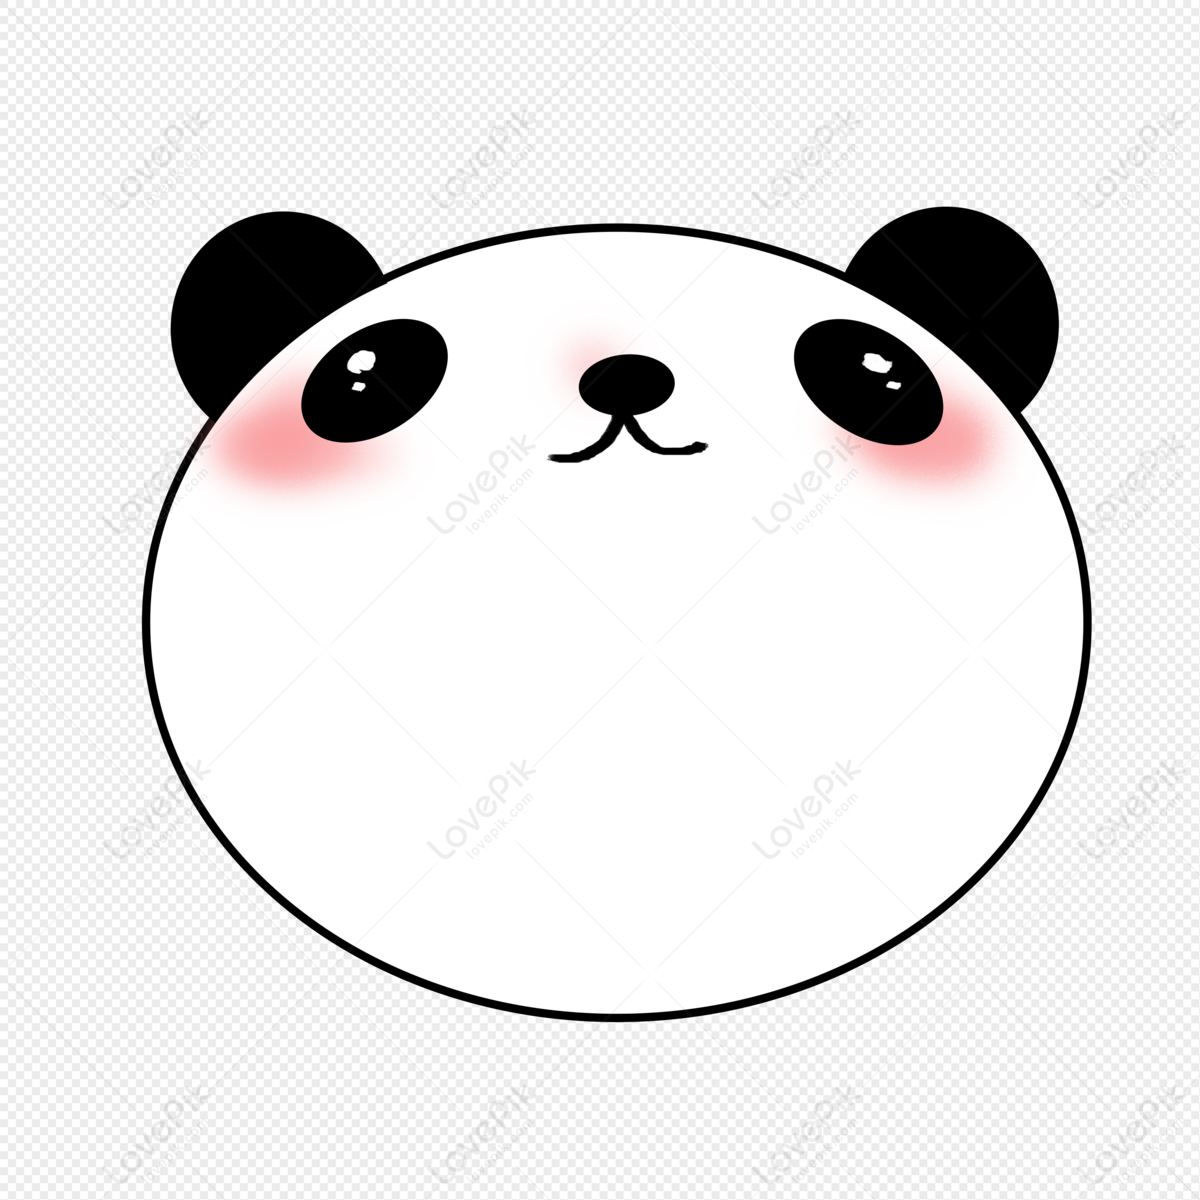 Hand Drawn Cartoon Panda Border Free PNG And Clipart Image For Free  Download - Lovepik | 401353119